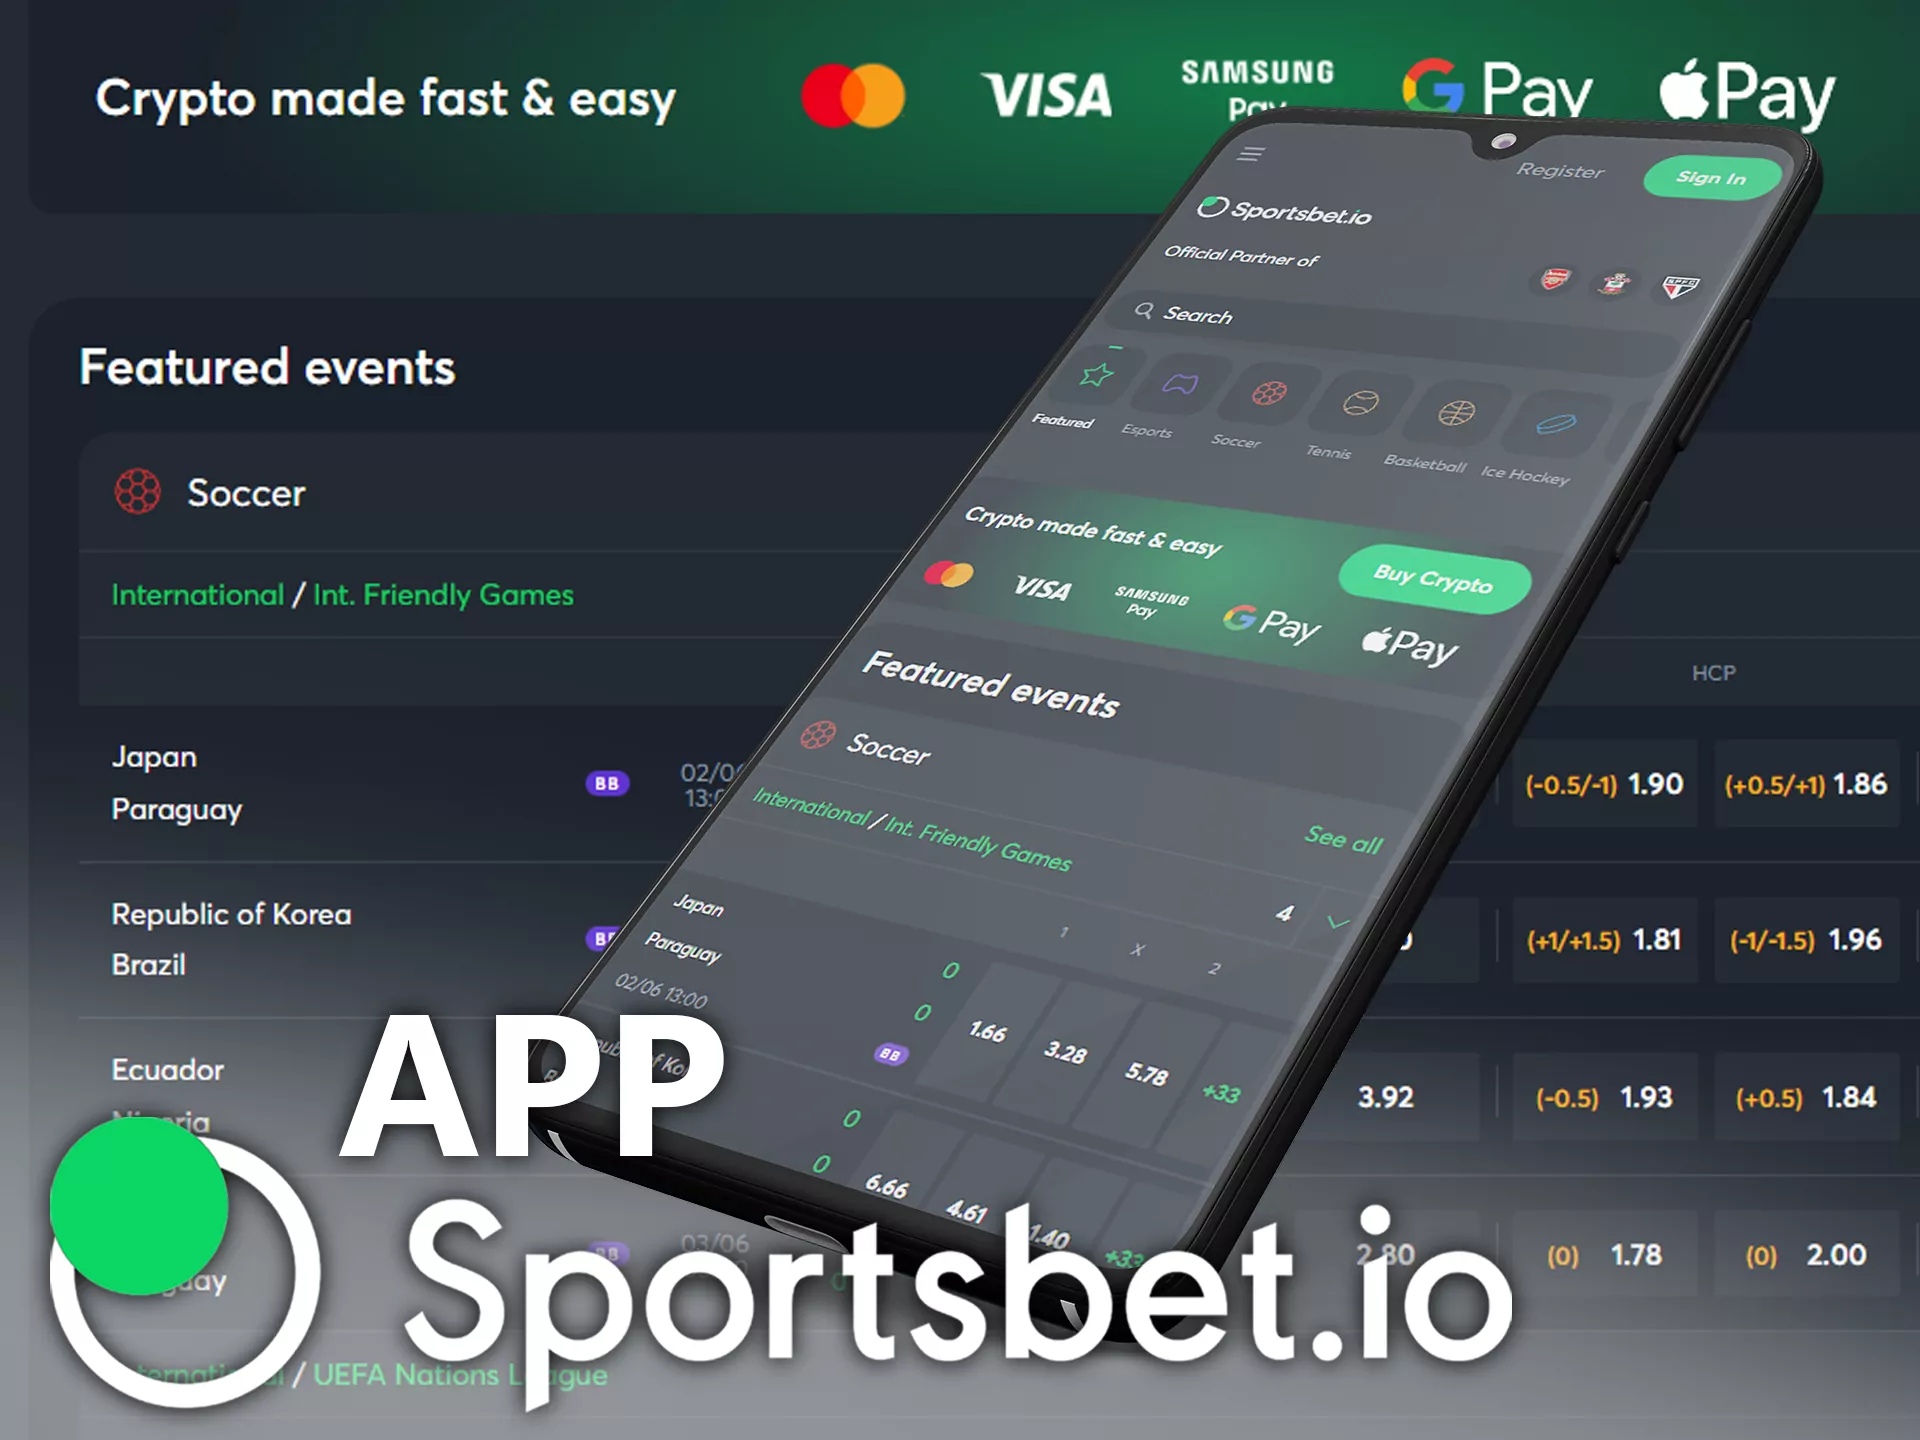 Download the mobile app and place bets whenever you want.